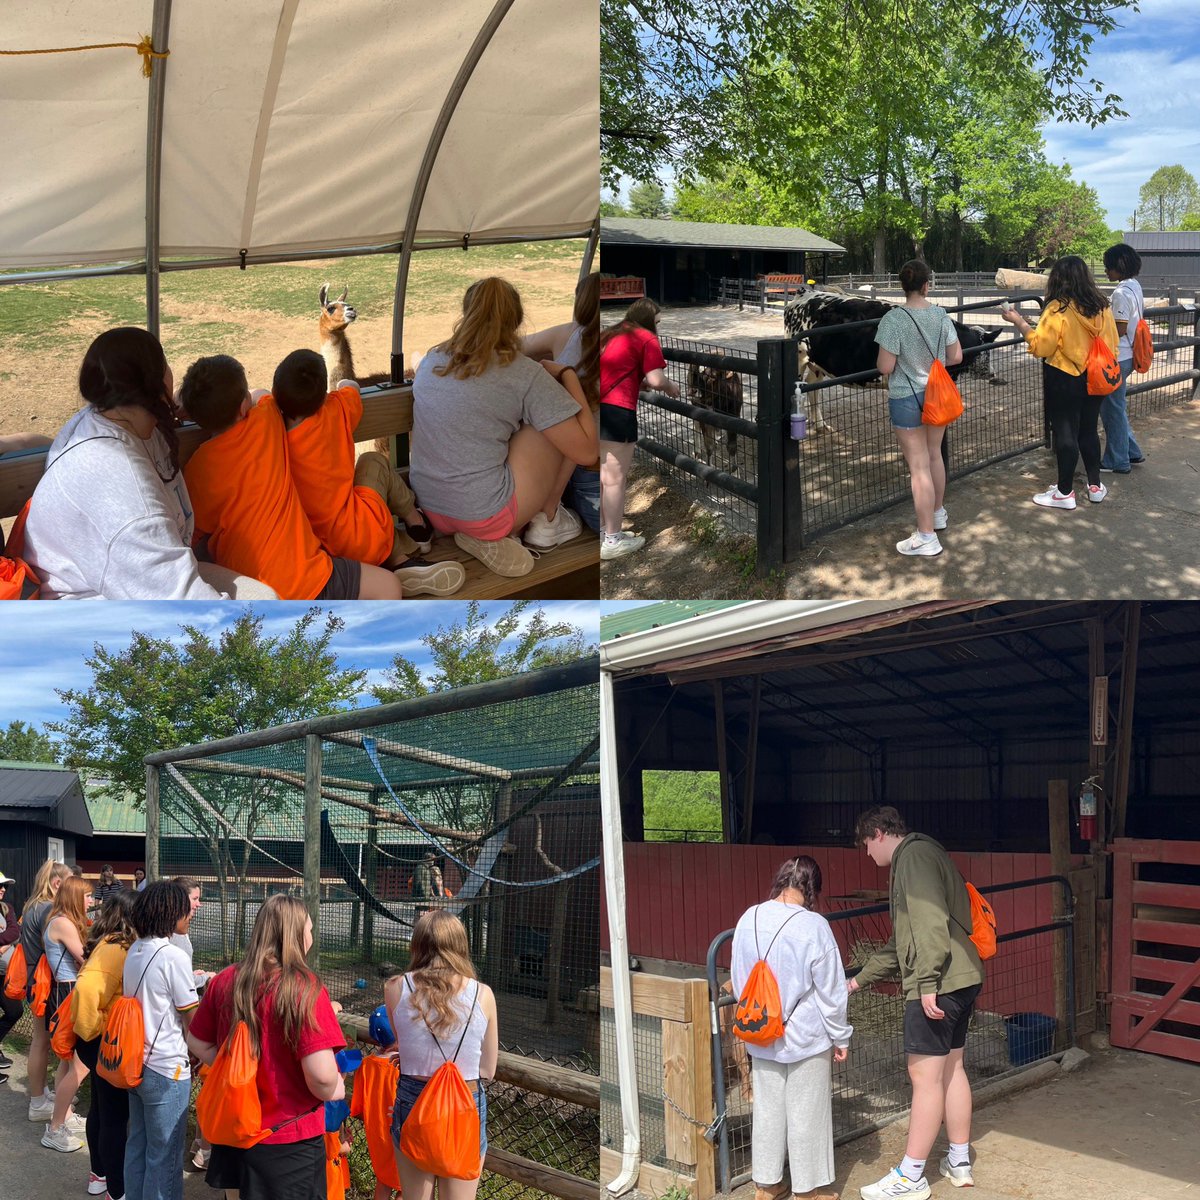 The Early Childhood program took the Munchkins to the Reston Zoo today. All of the students learned about nature and had a chance to feed the animals.